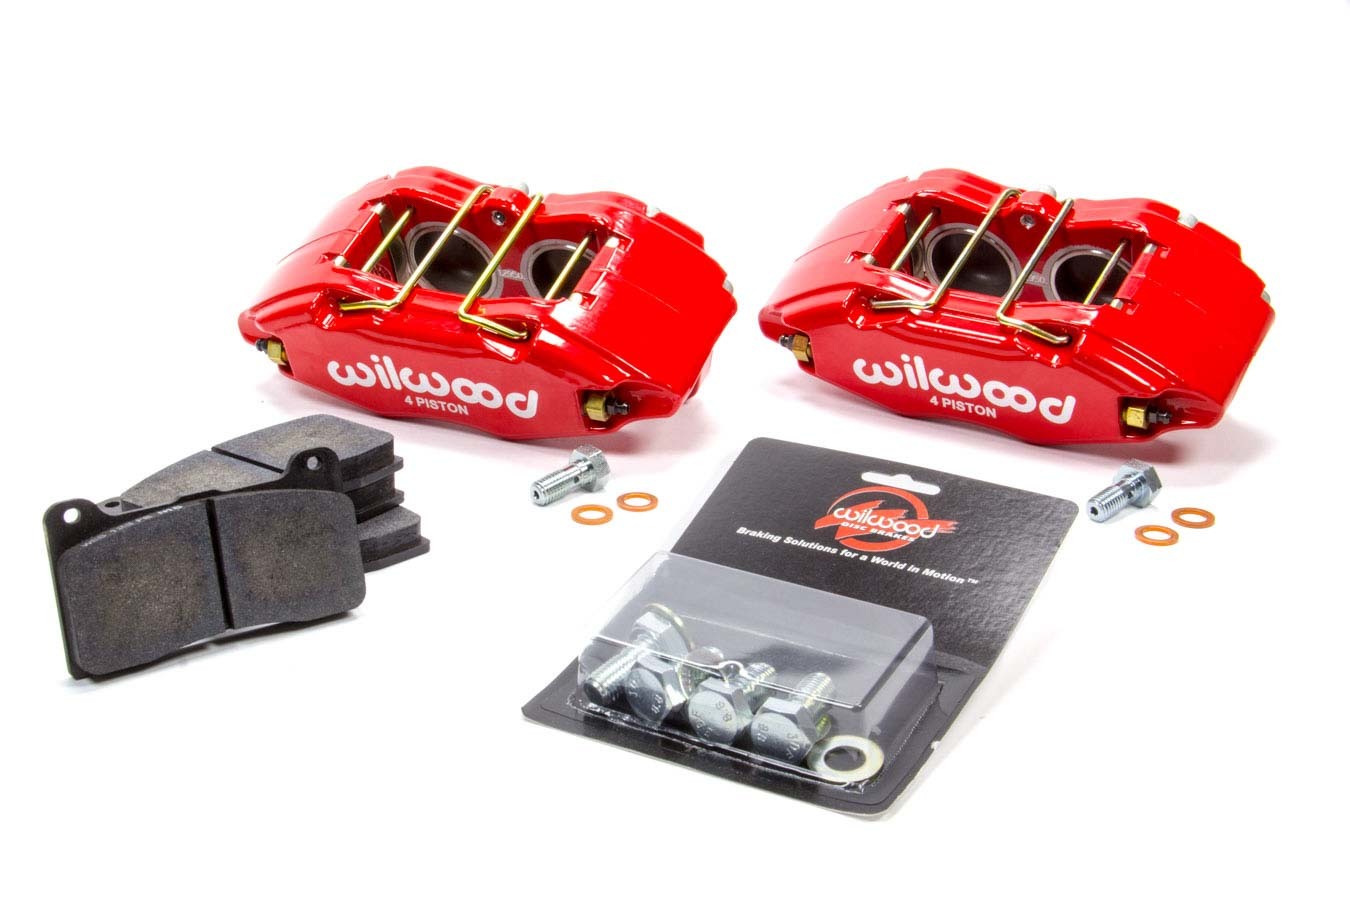 Wilwood 140-13029-R Brake Caliper, Forged DPHA, 4 Piston, Aluminum, Red Powder Coat, 10.320 in OD x 0.830 in Thick Rotor, 5.510 in Lug Mount, Acura / Honda 1989-2017, Kit